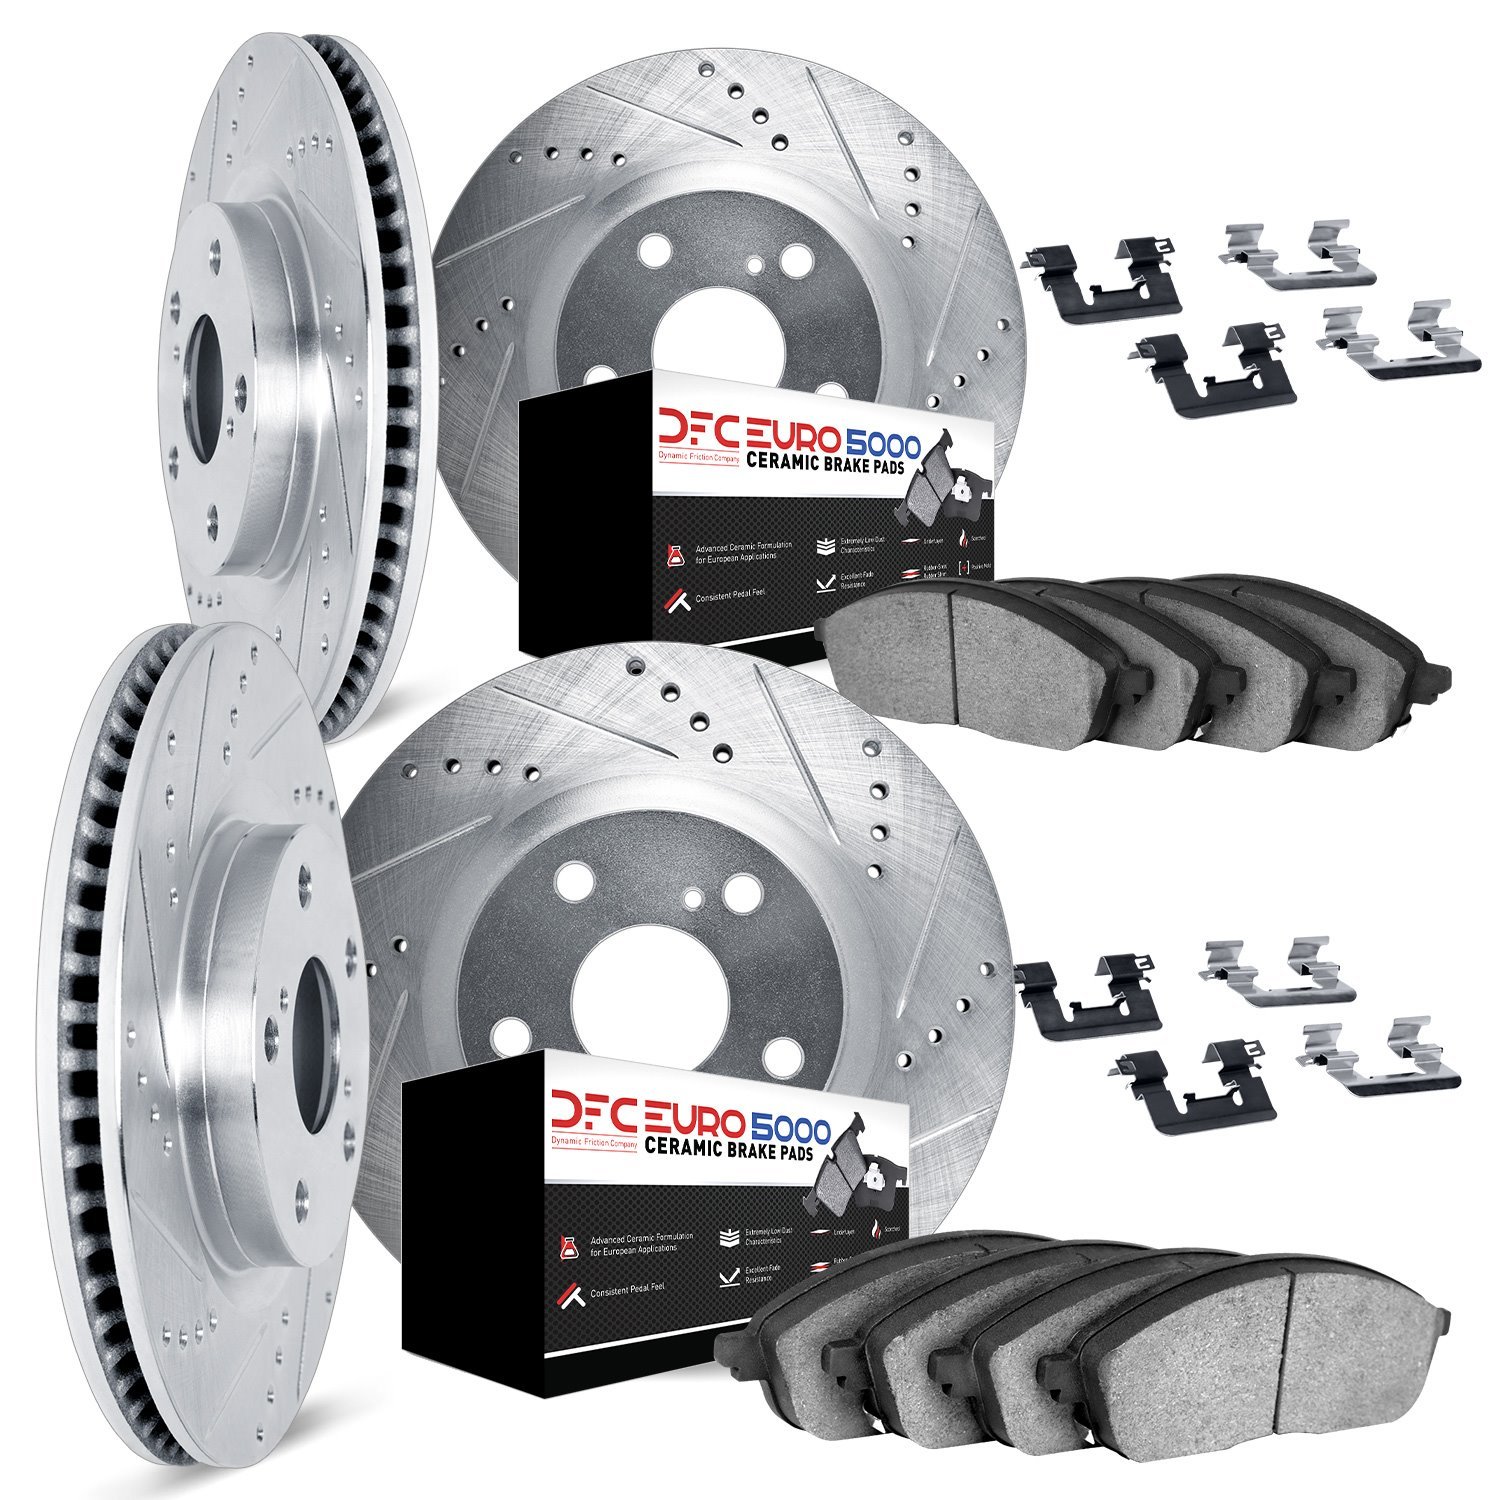 7614-46000 Drilled/Slotted Brake Rotors w/5000 Euro Ceramic Brake Pads Kit & Hardware [Silver], 2005-2008 GM, Position: Front an